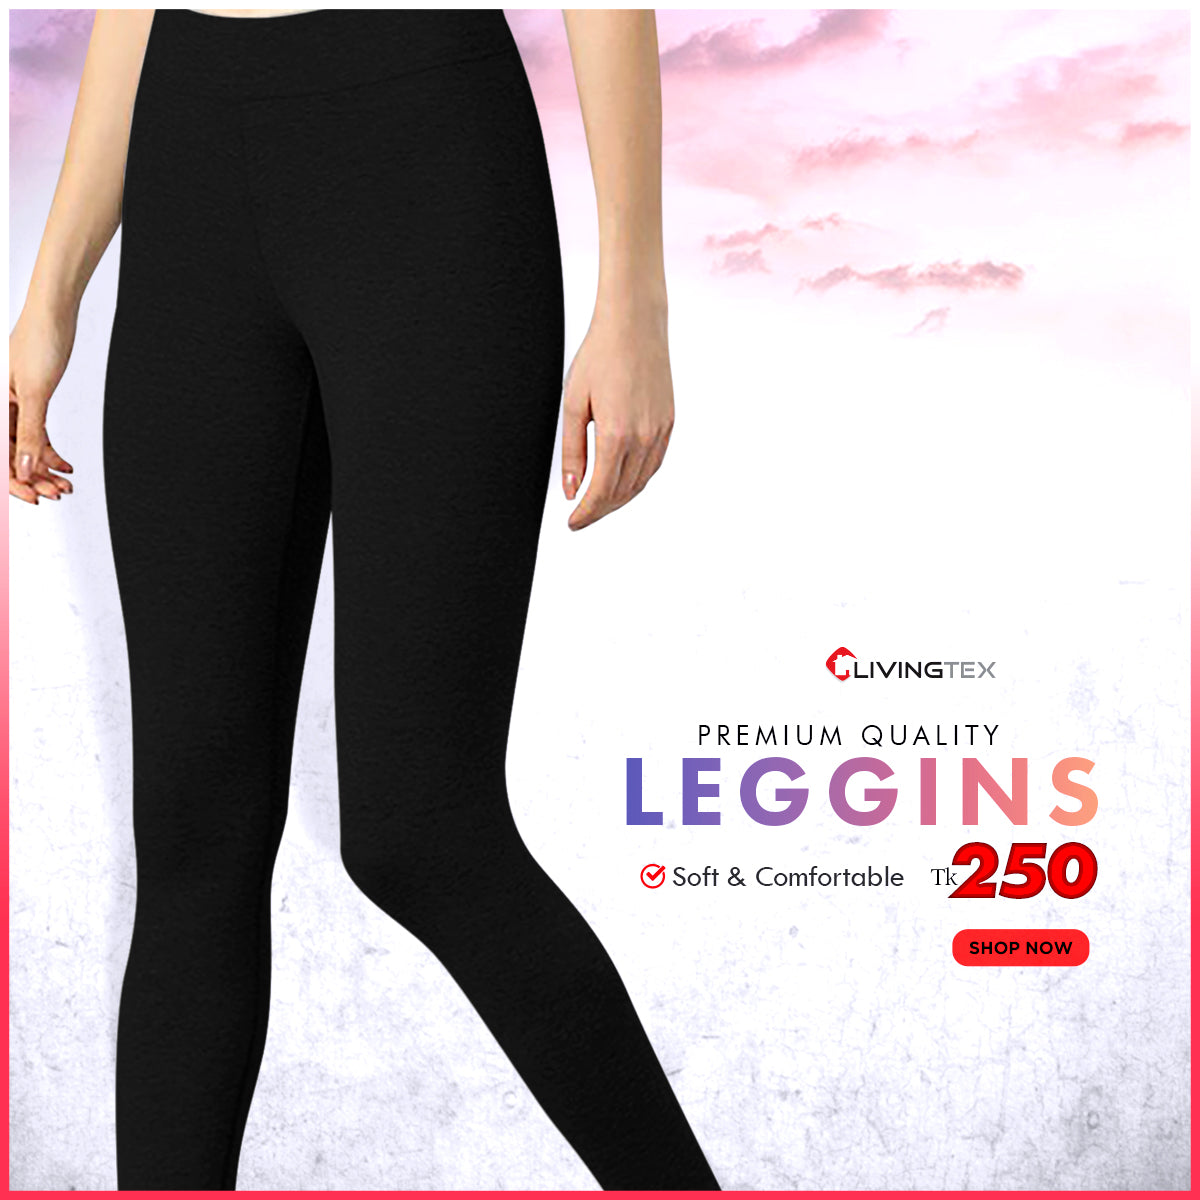 Buy Omtex Yoga Pants for Women Stretchable Tights Sports Fitness Gym Yoga  Pants Black online